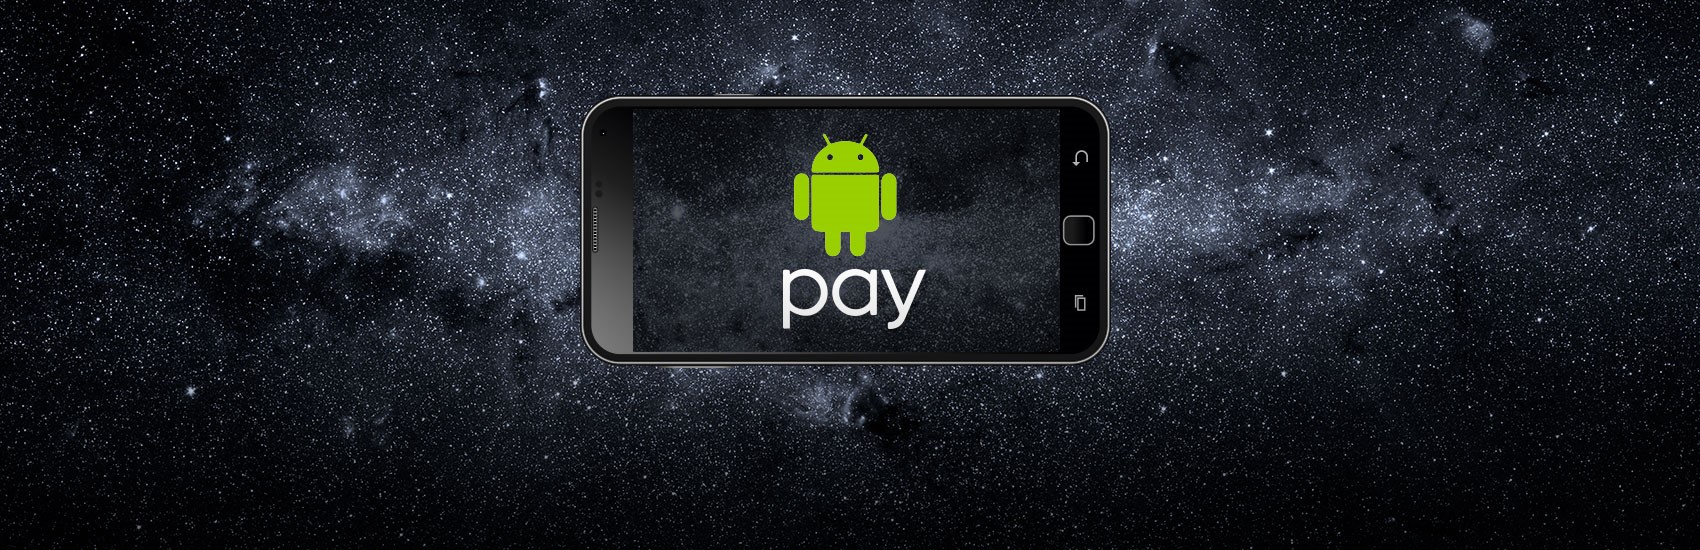 Miura_and_Android_Pay_Going_Mobile_and_Driving_Growth_for_UK_Businesses.jpg